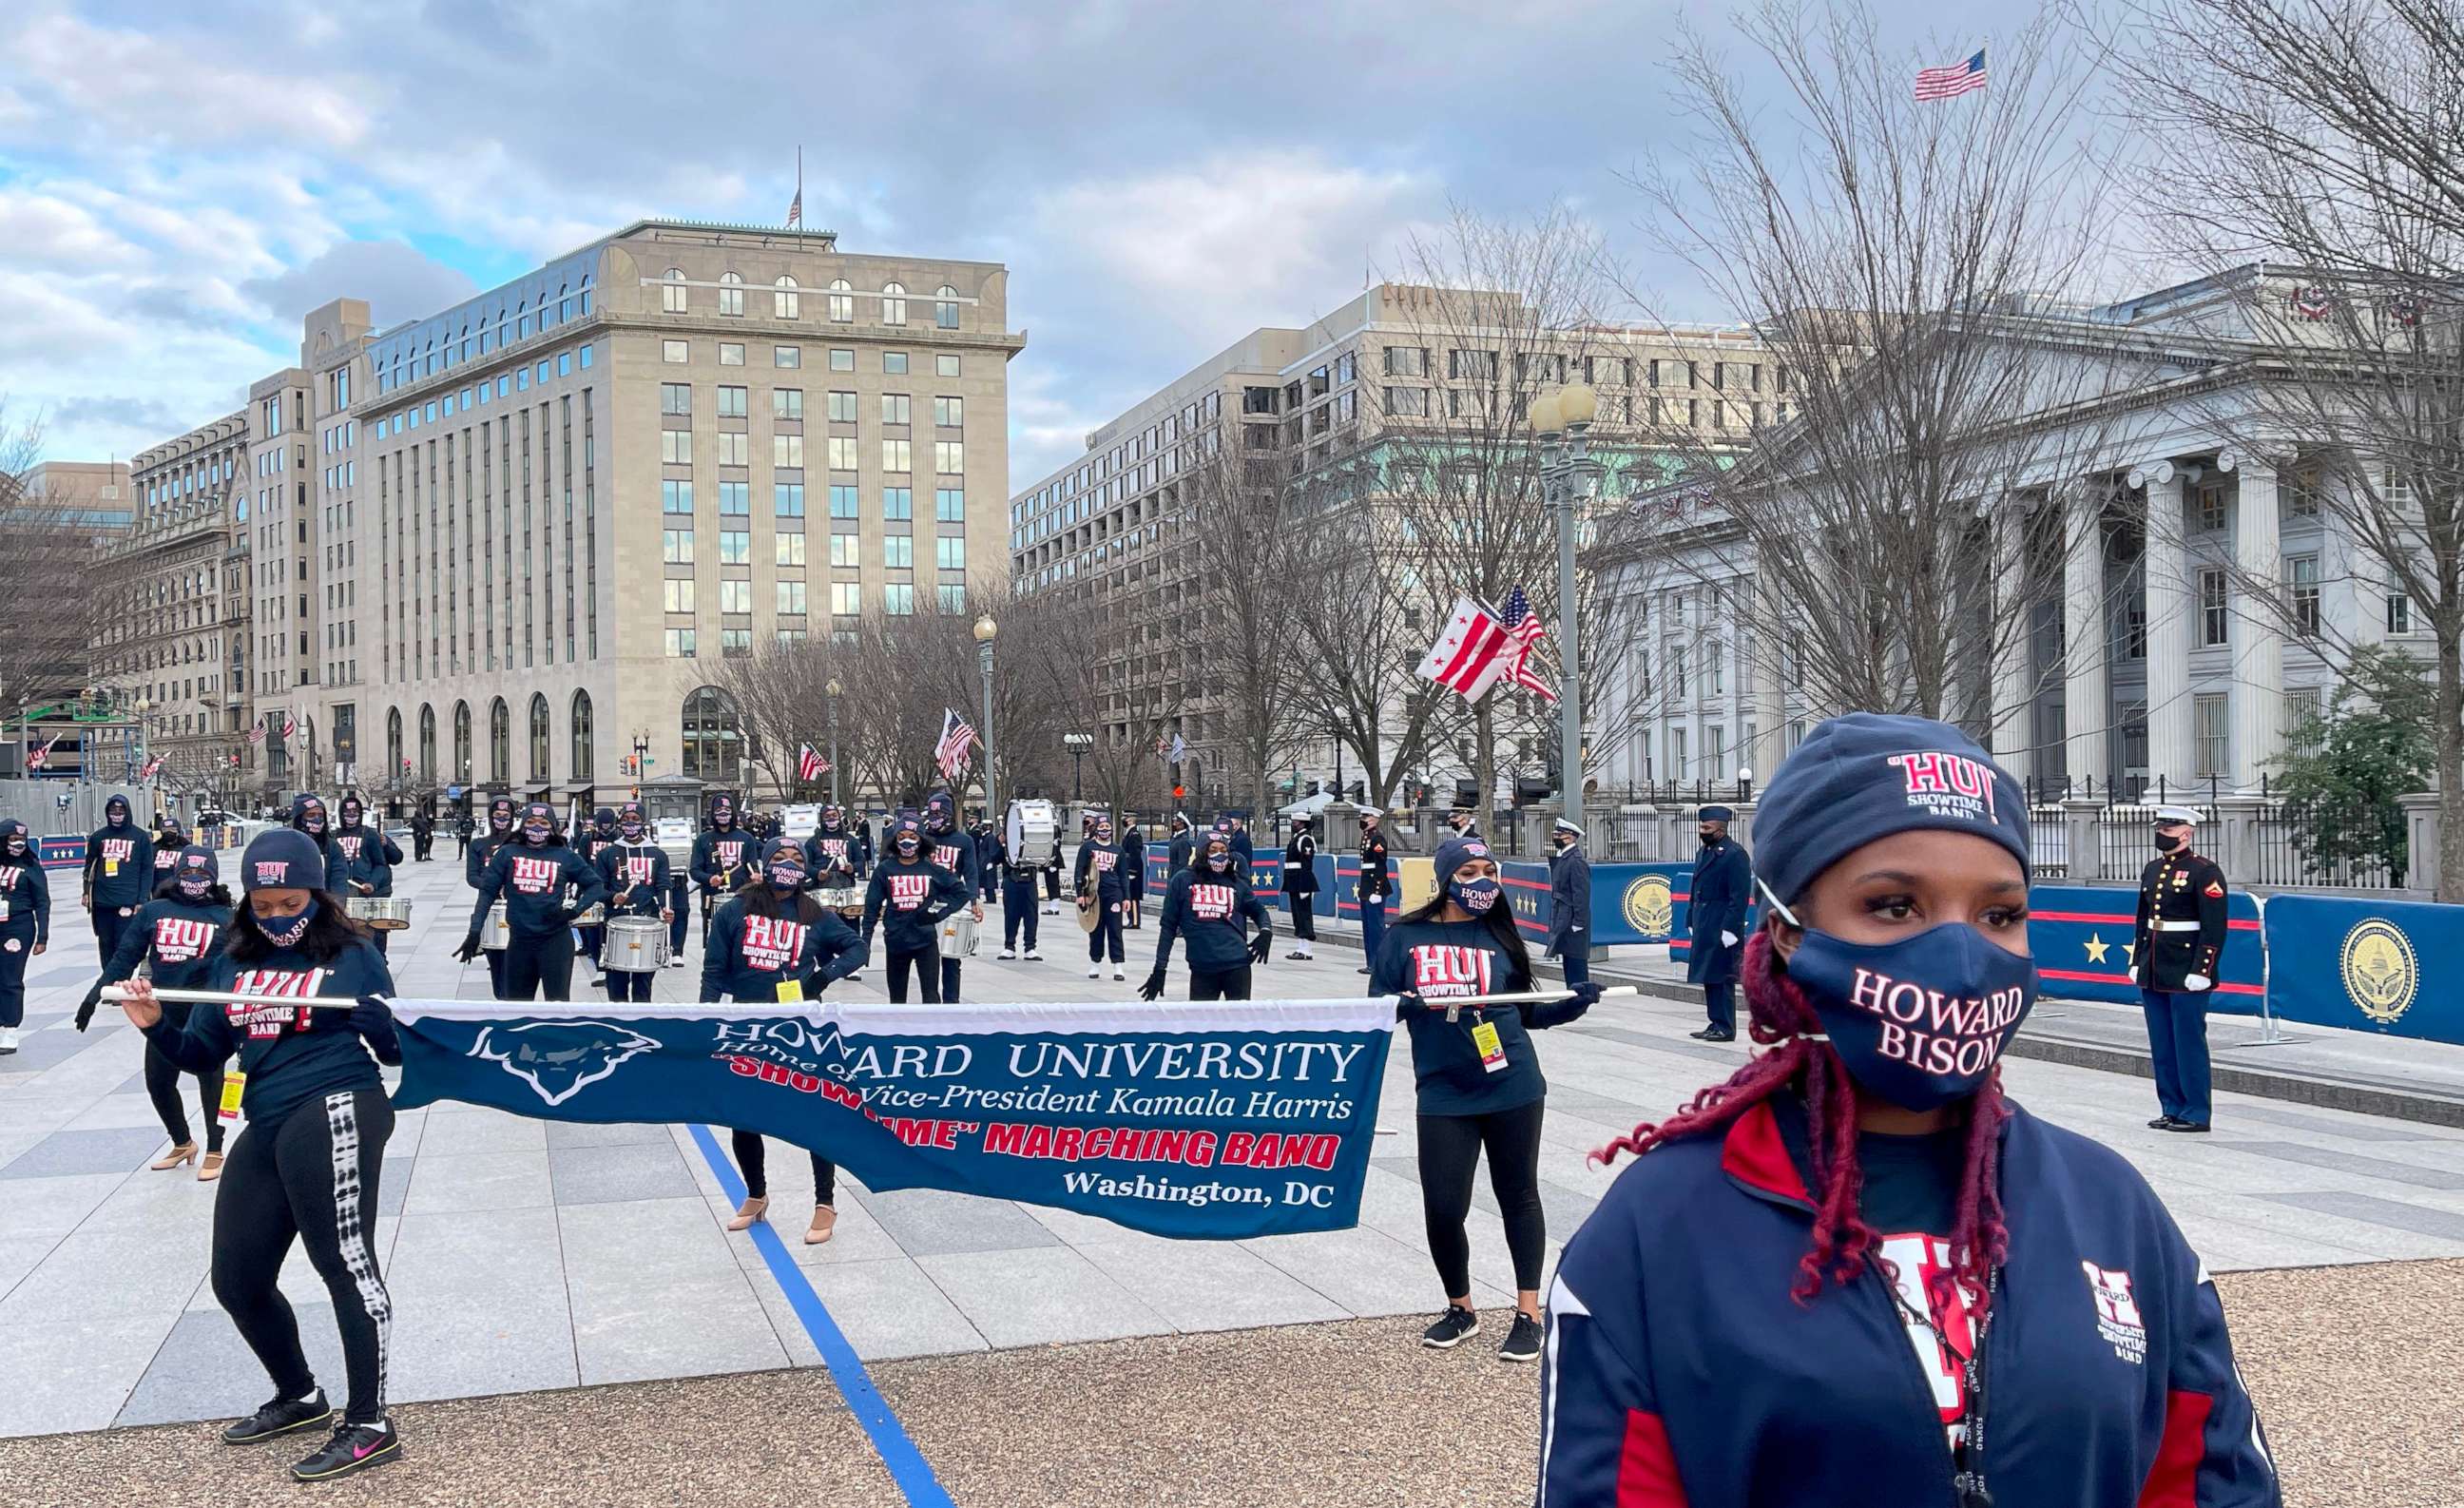 PHOTO: The Howard University marching band participates in a rehearsal of the parade down Pennsylvania Avenue in Washington, DC, Jan. 18, 2021, ahead of the inauguration of President-elect Joe Biden and Vice President-elect Kamala Harris.